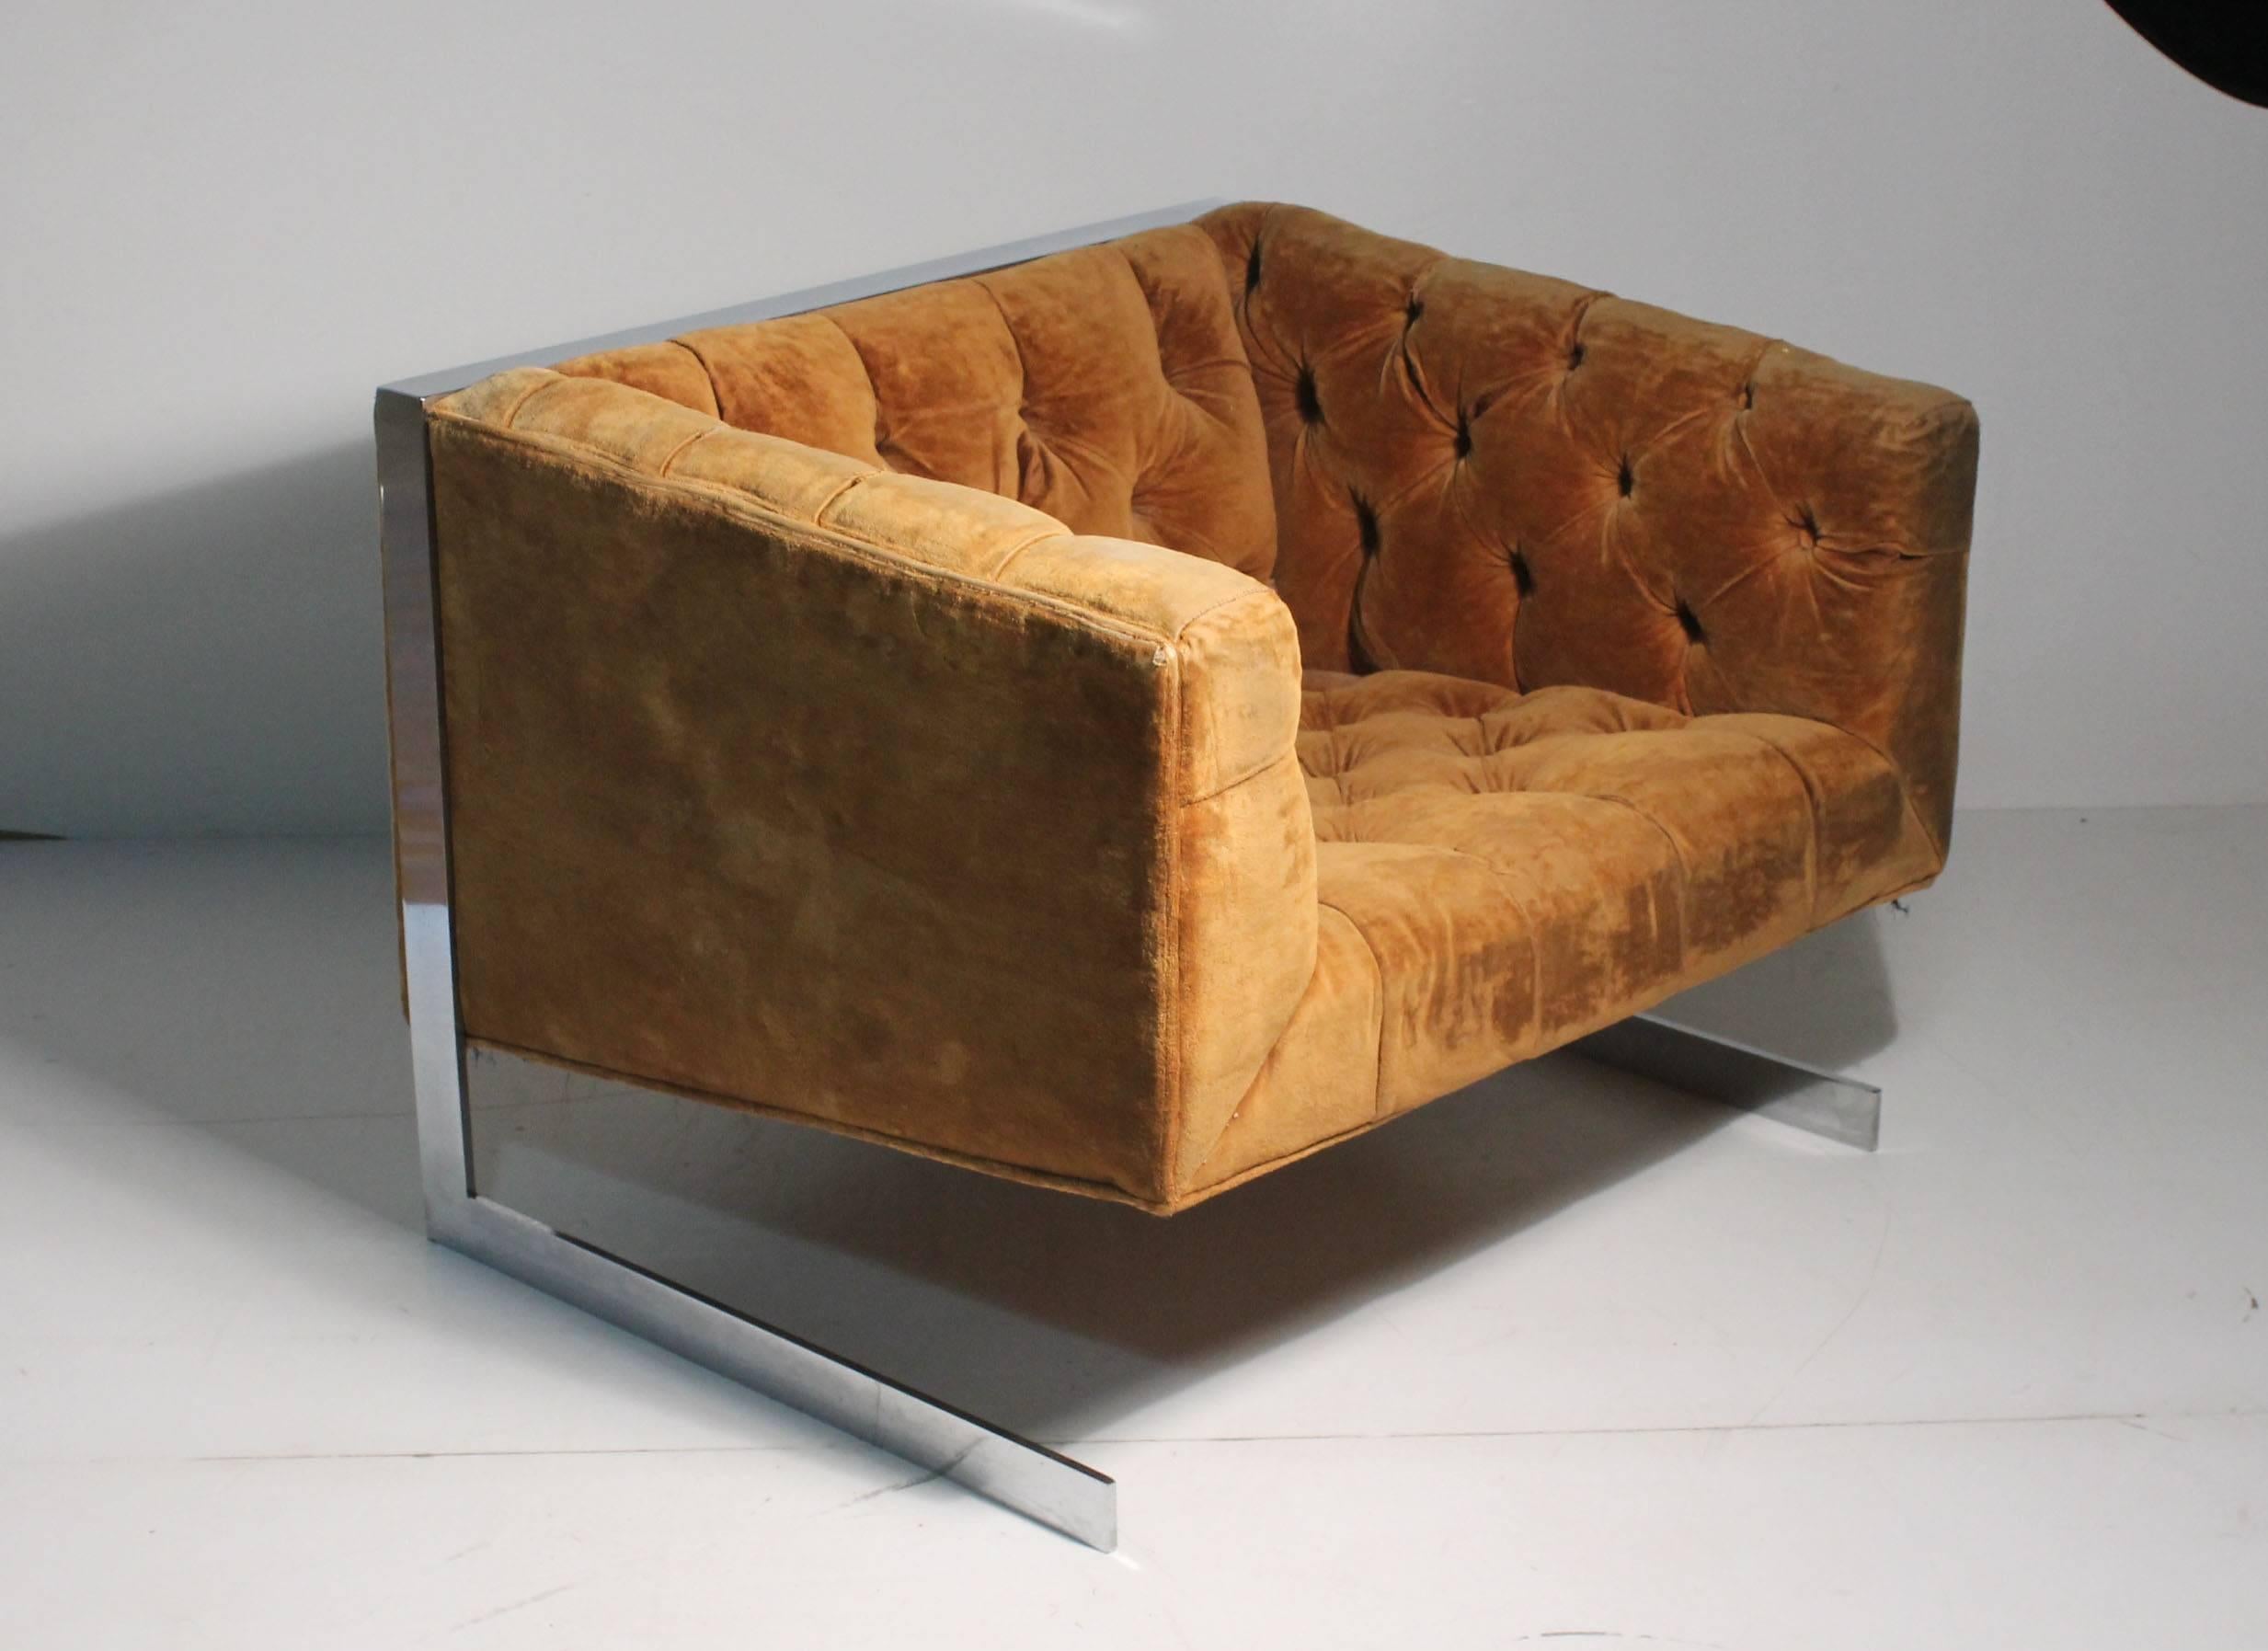 Cantilever Lounge Chair attributed to Milo Baughman. 
One of the best forms in solid bar chromed steel.